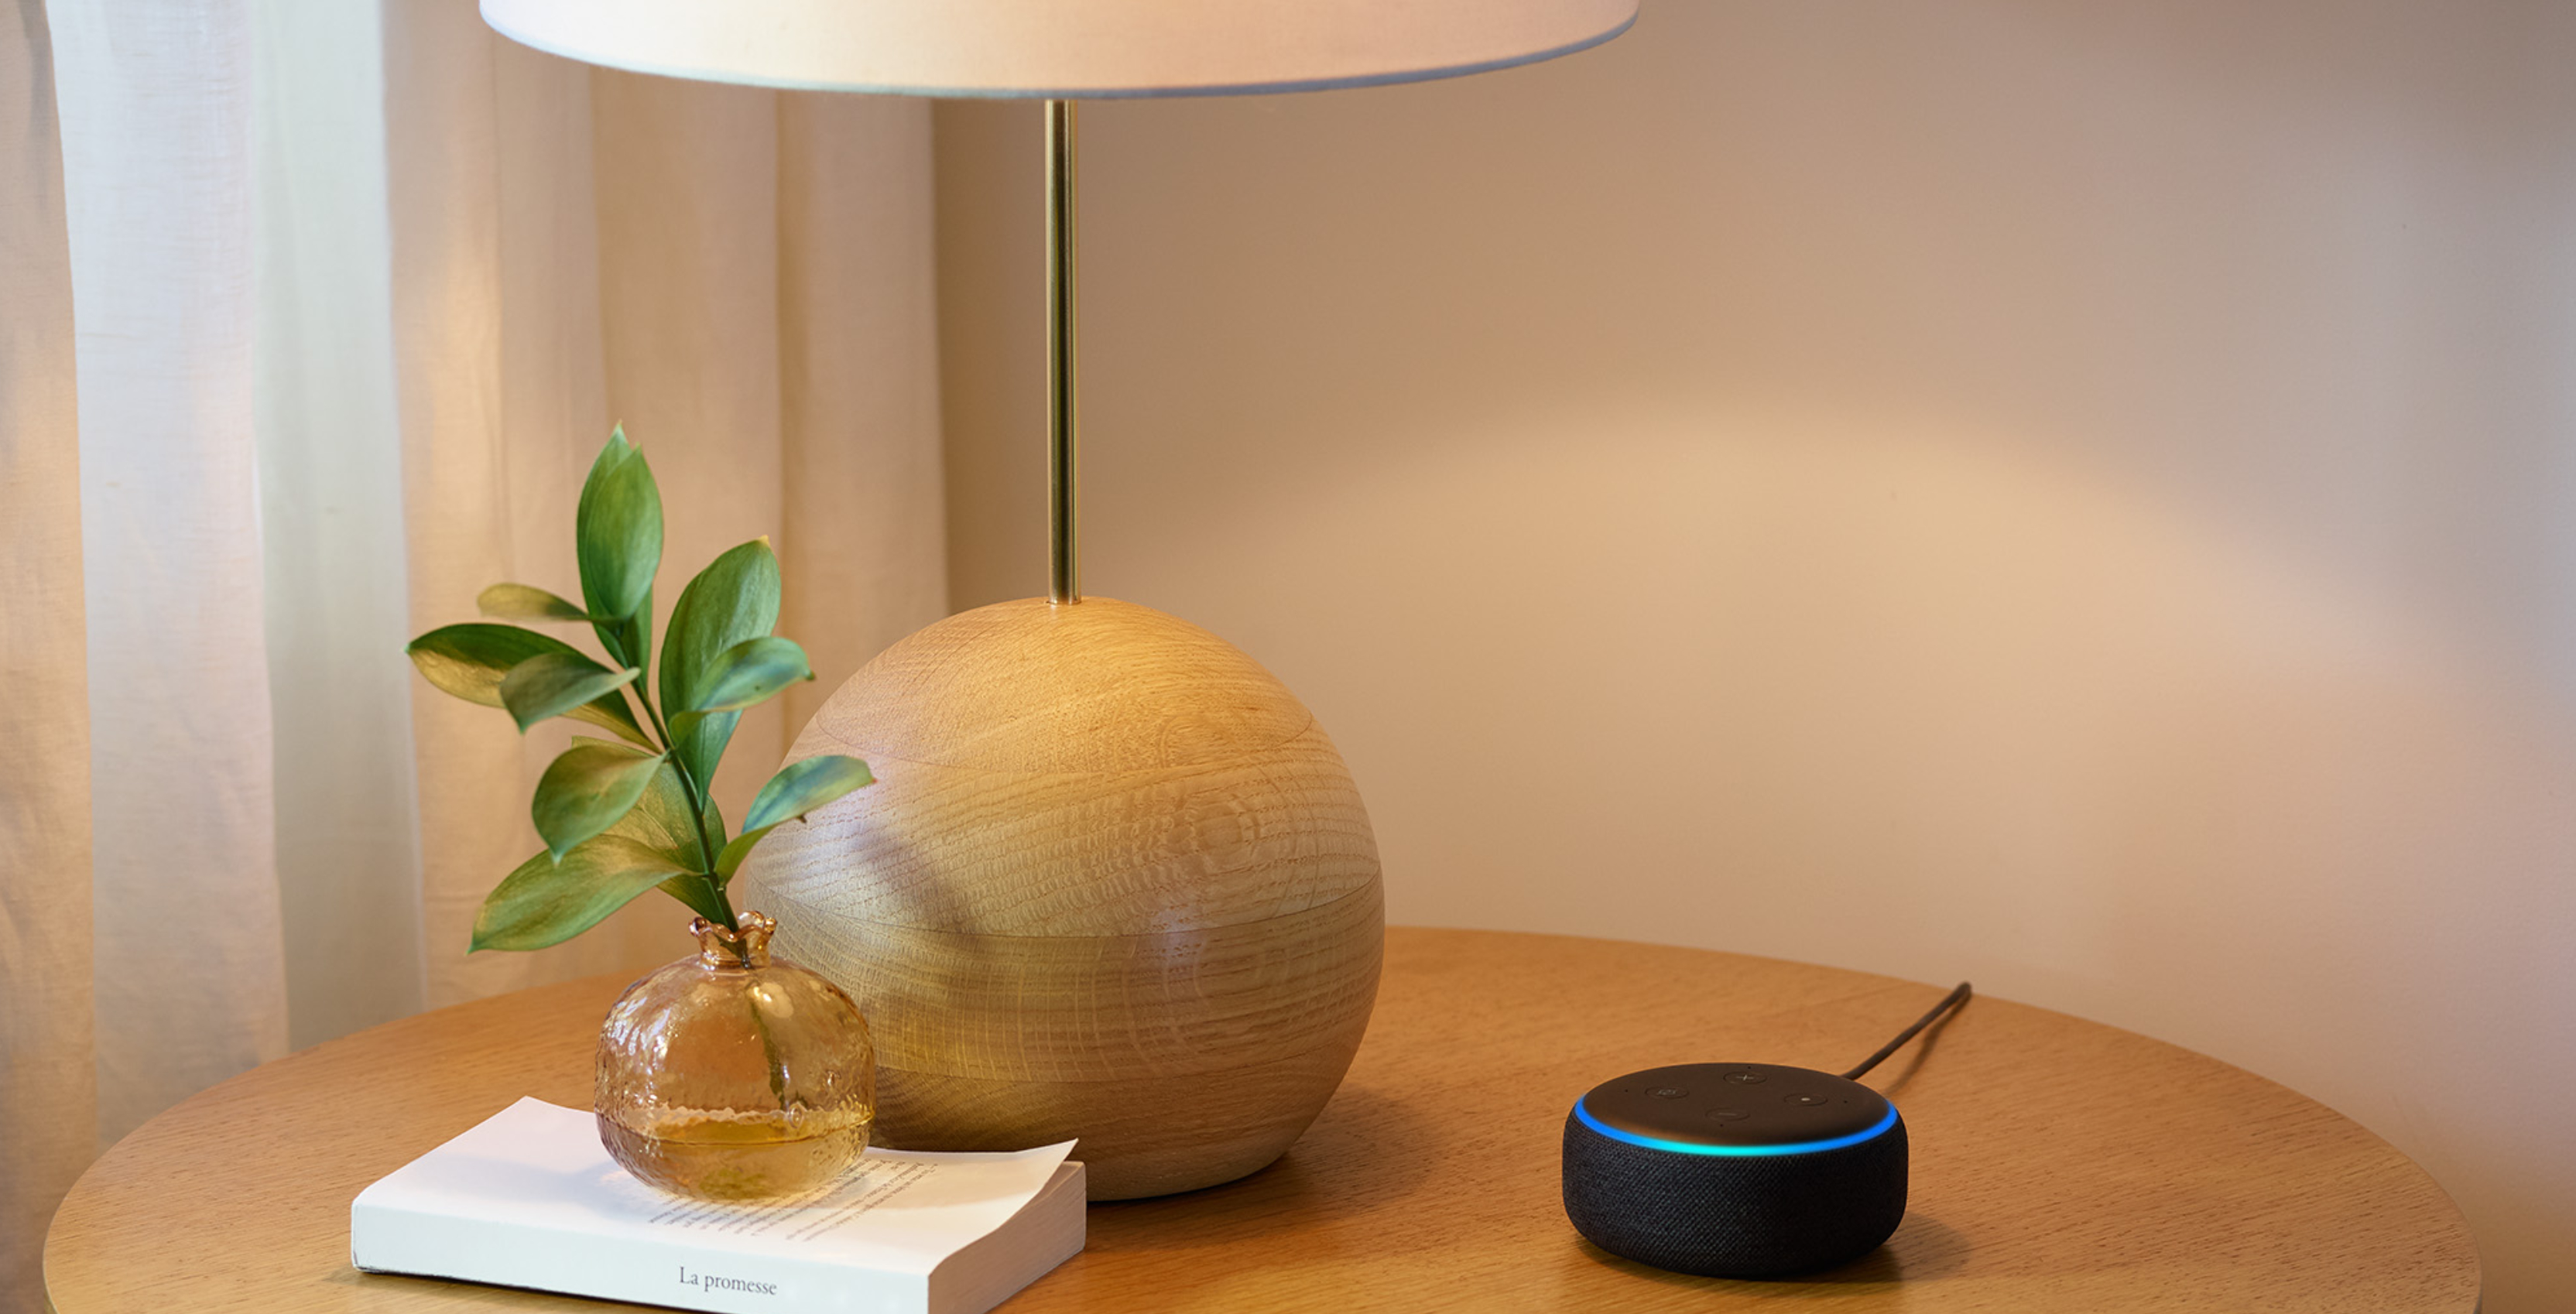 Amazon Echo on a table with a lamp